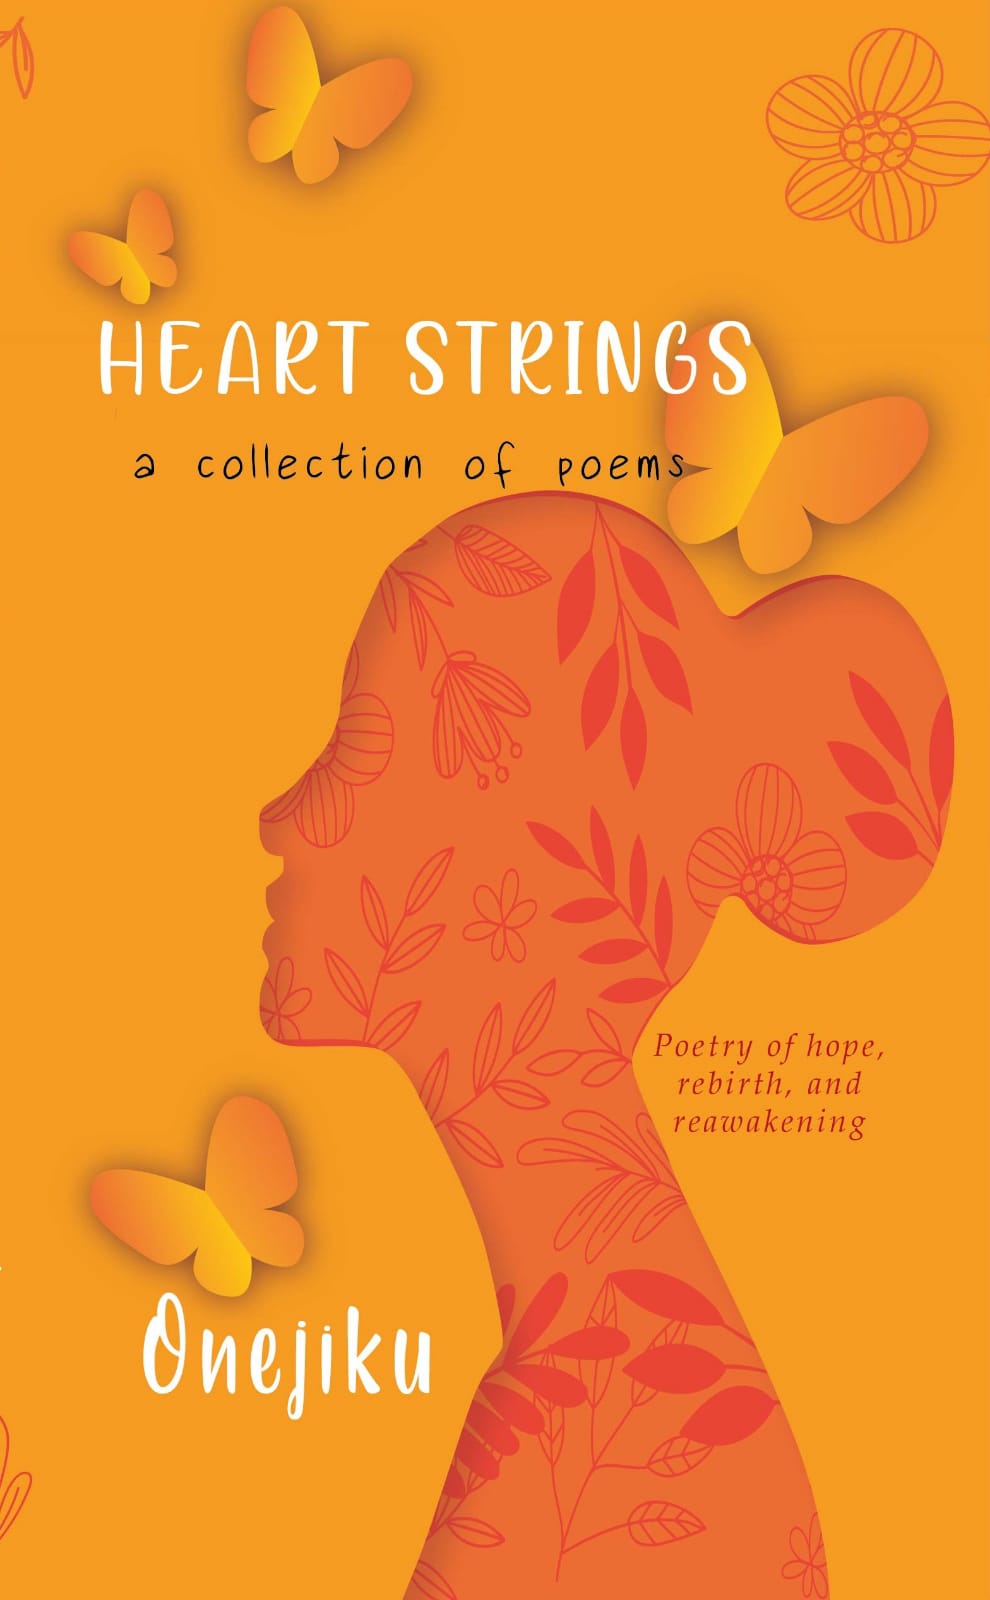 Heart Strings – a collection of poems